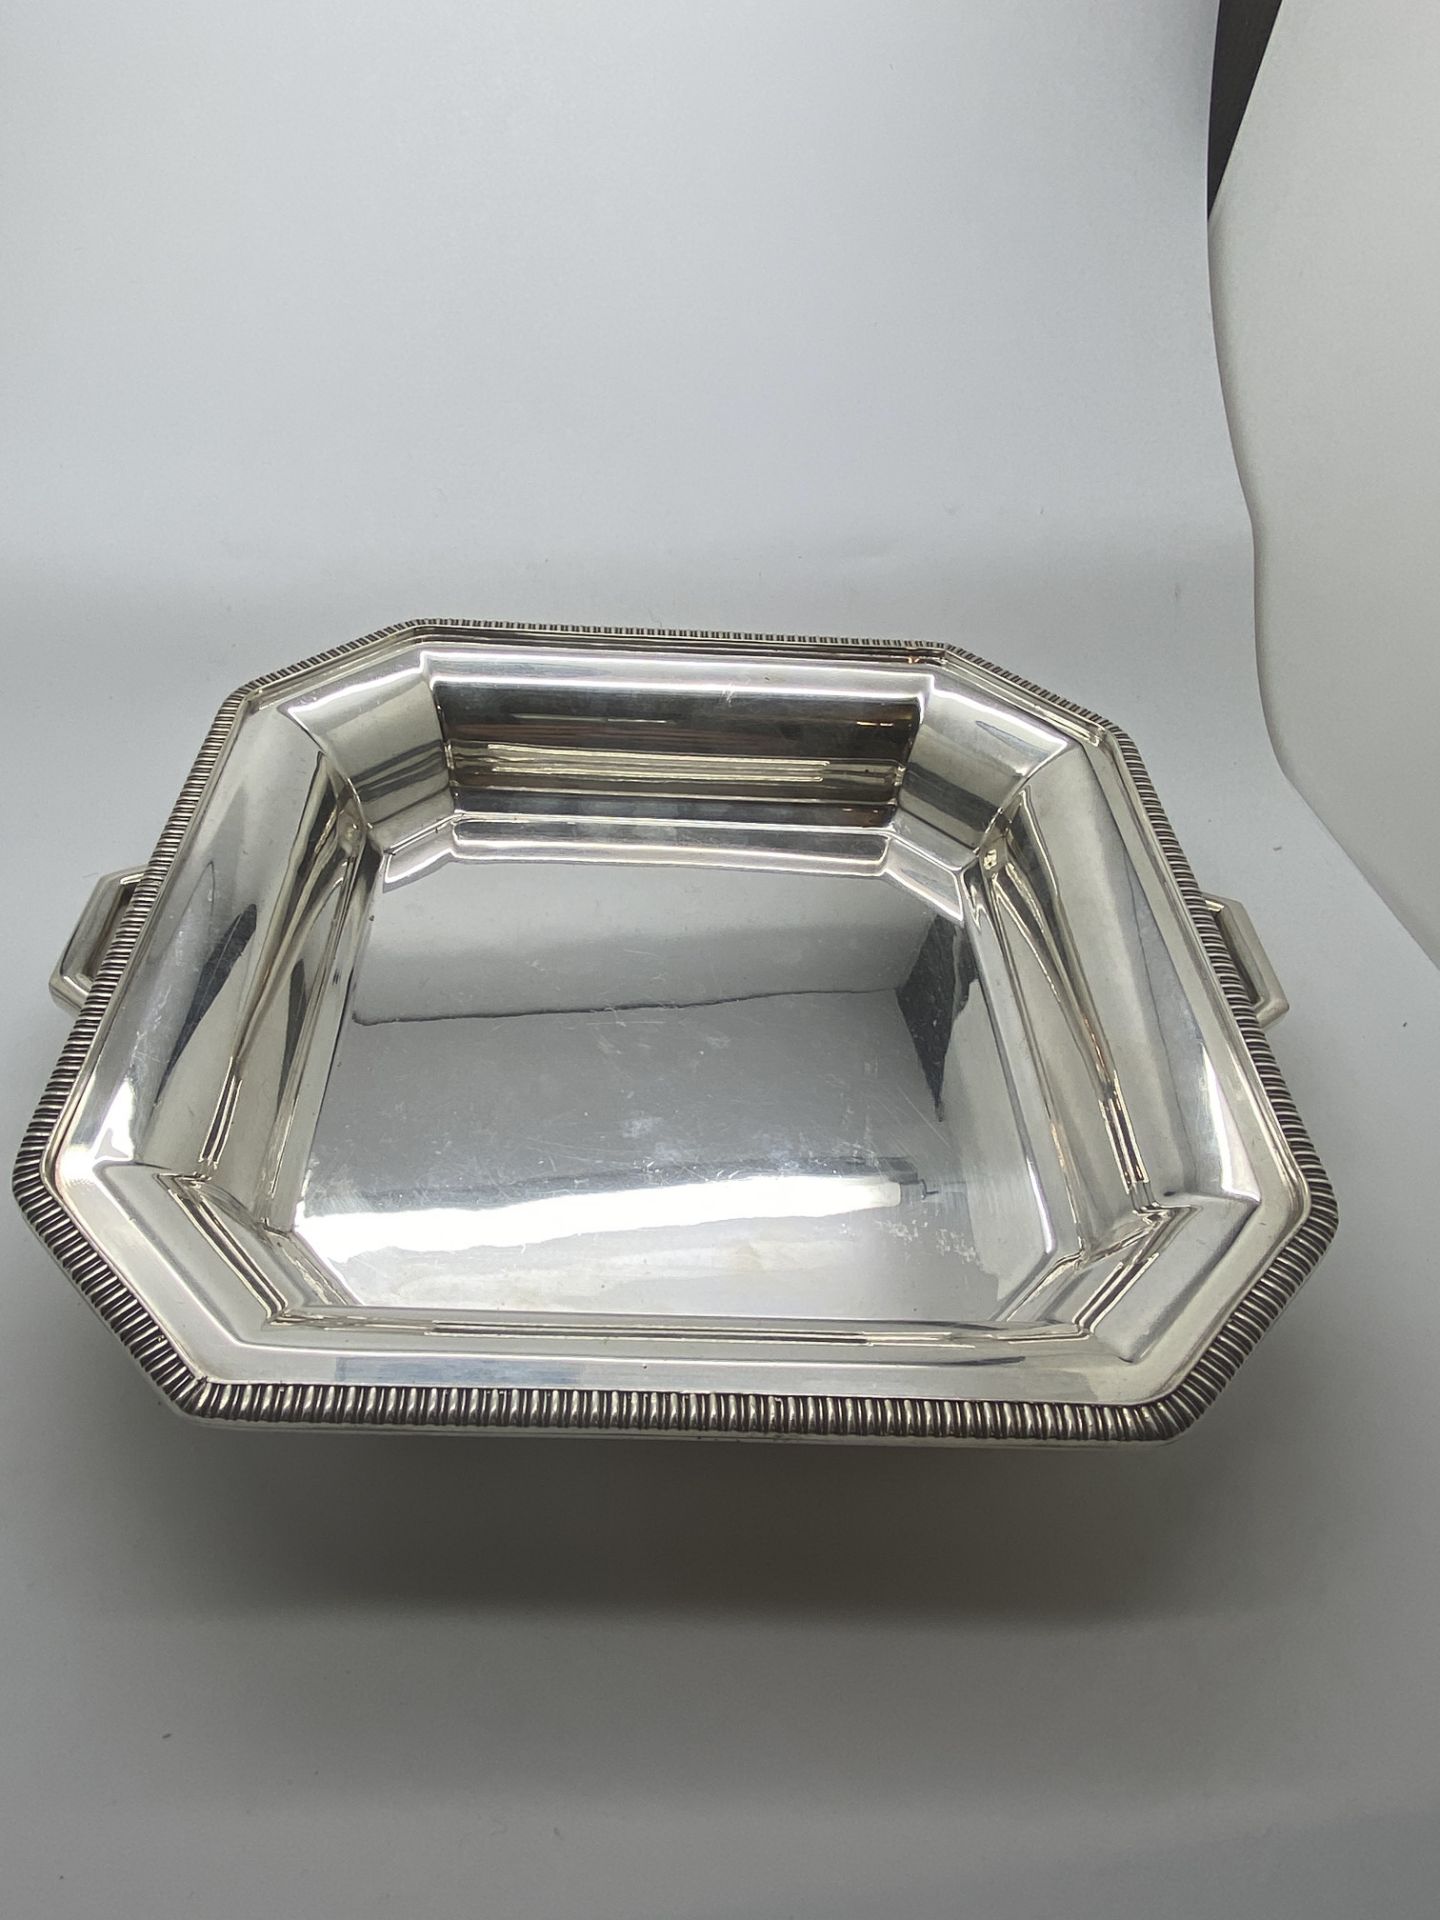 HEAVY SILVER COLOURED METAL TRAY APPROX 8.5" X 8.5"